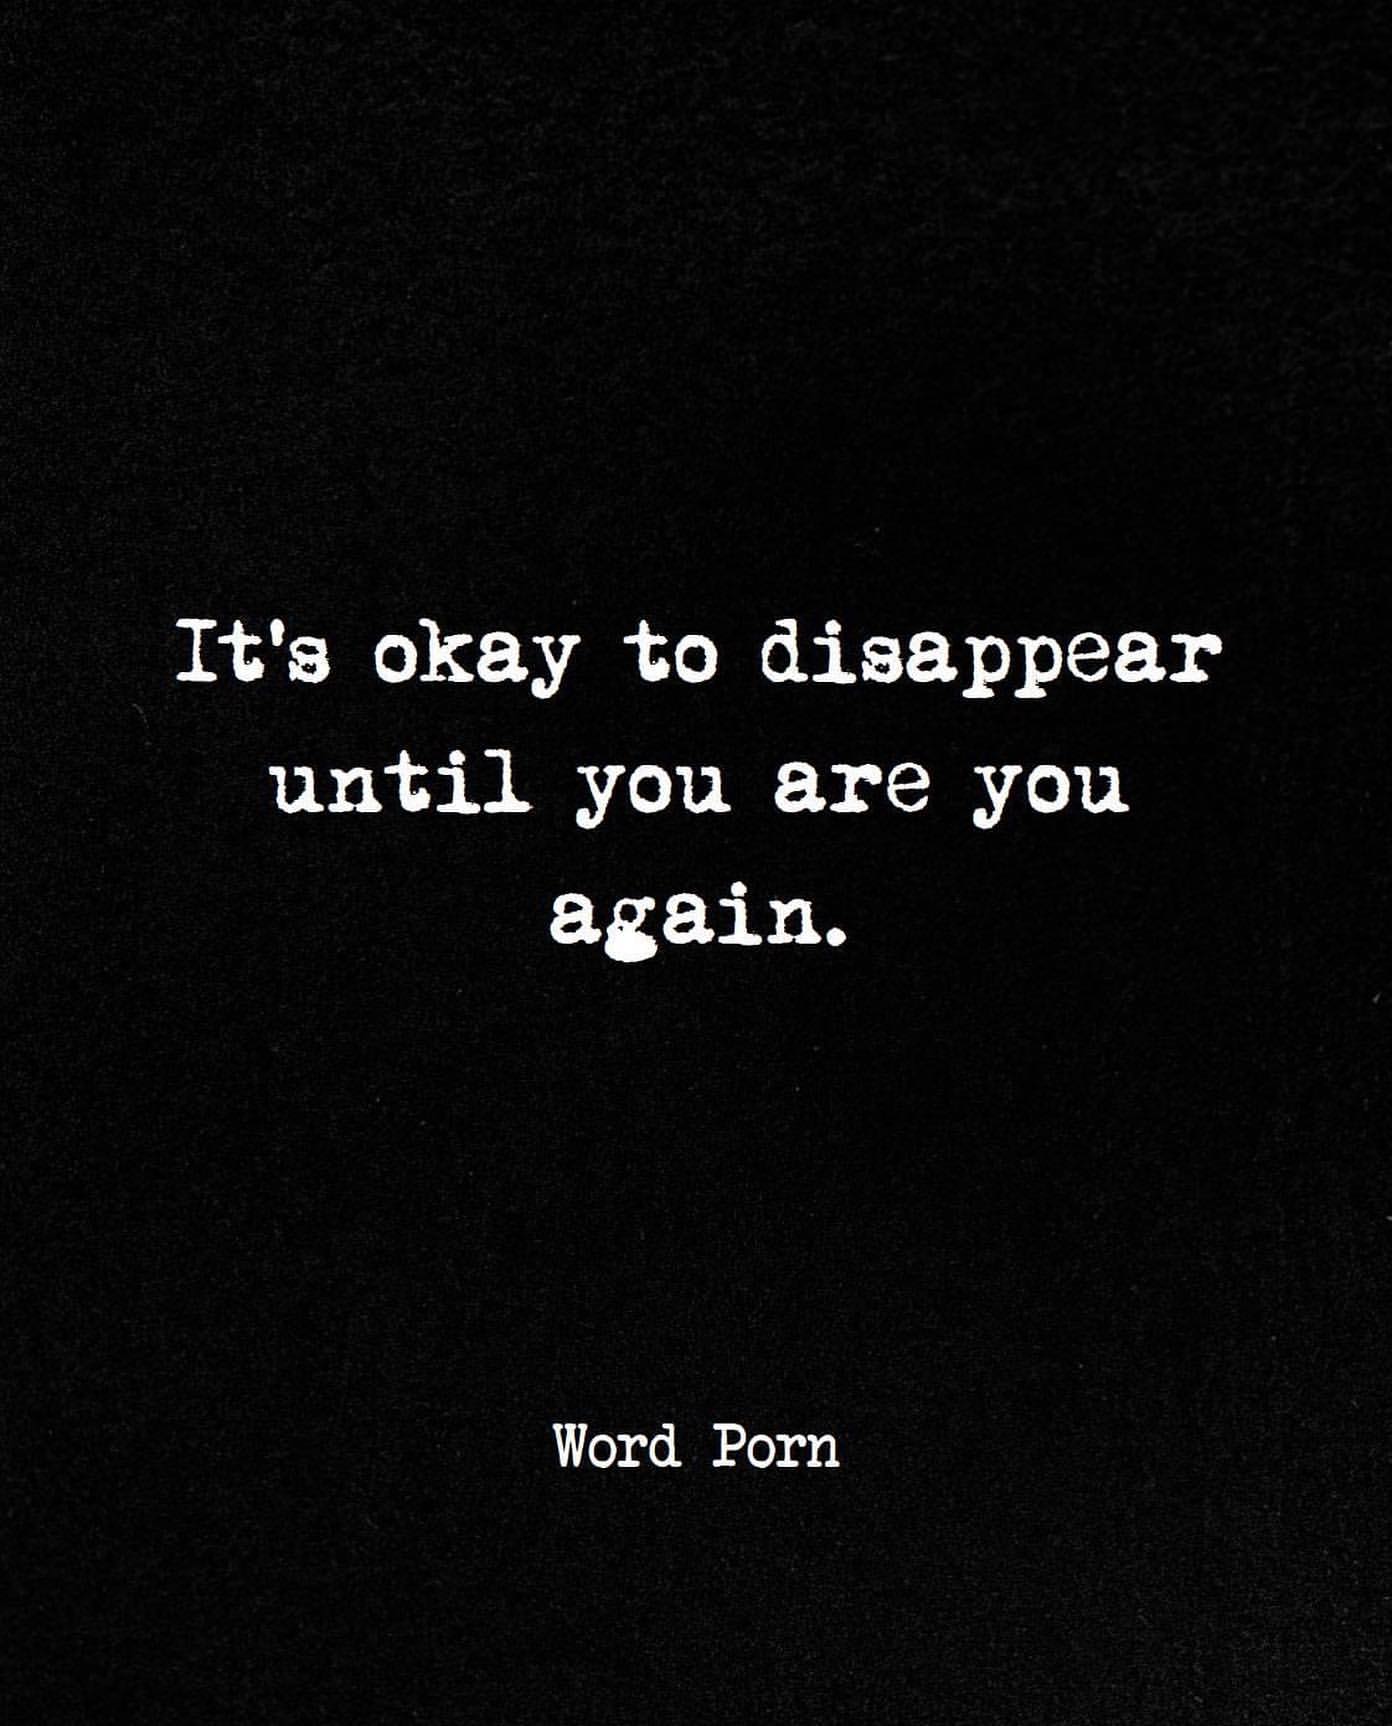 It's okay to disappear until you are you again.